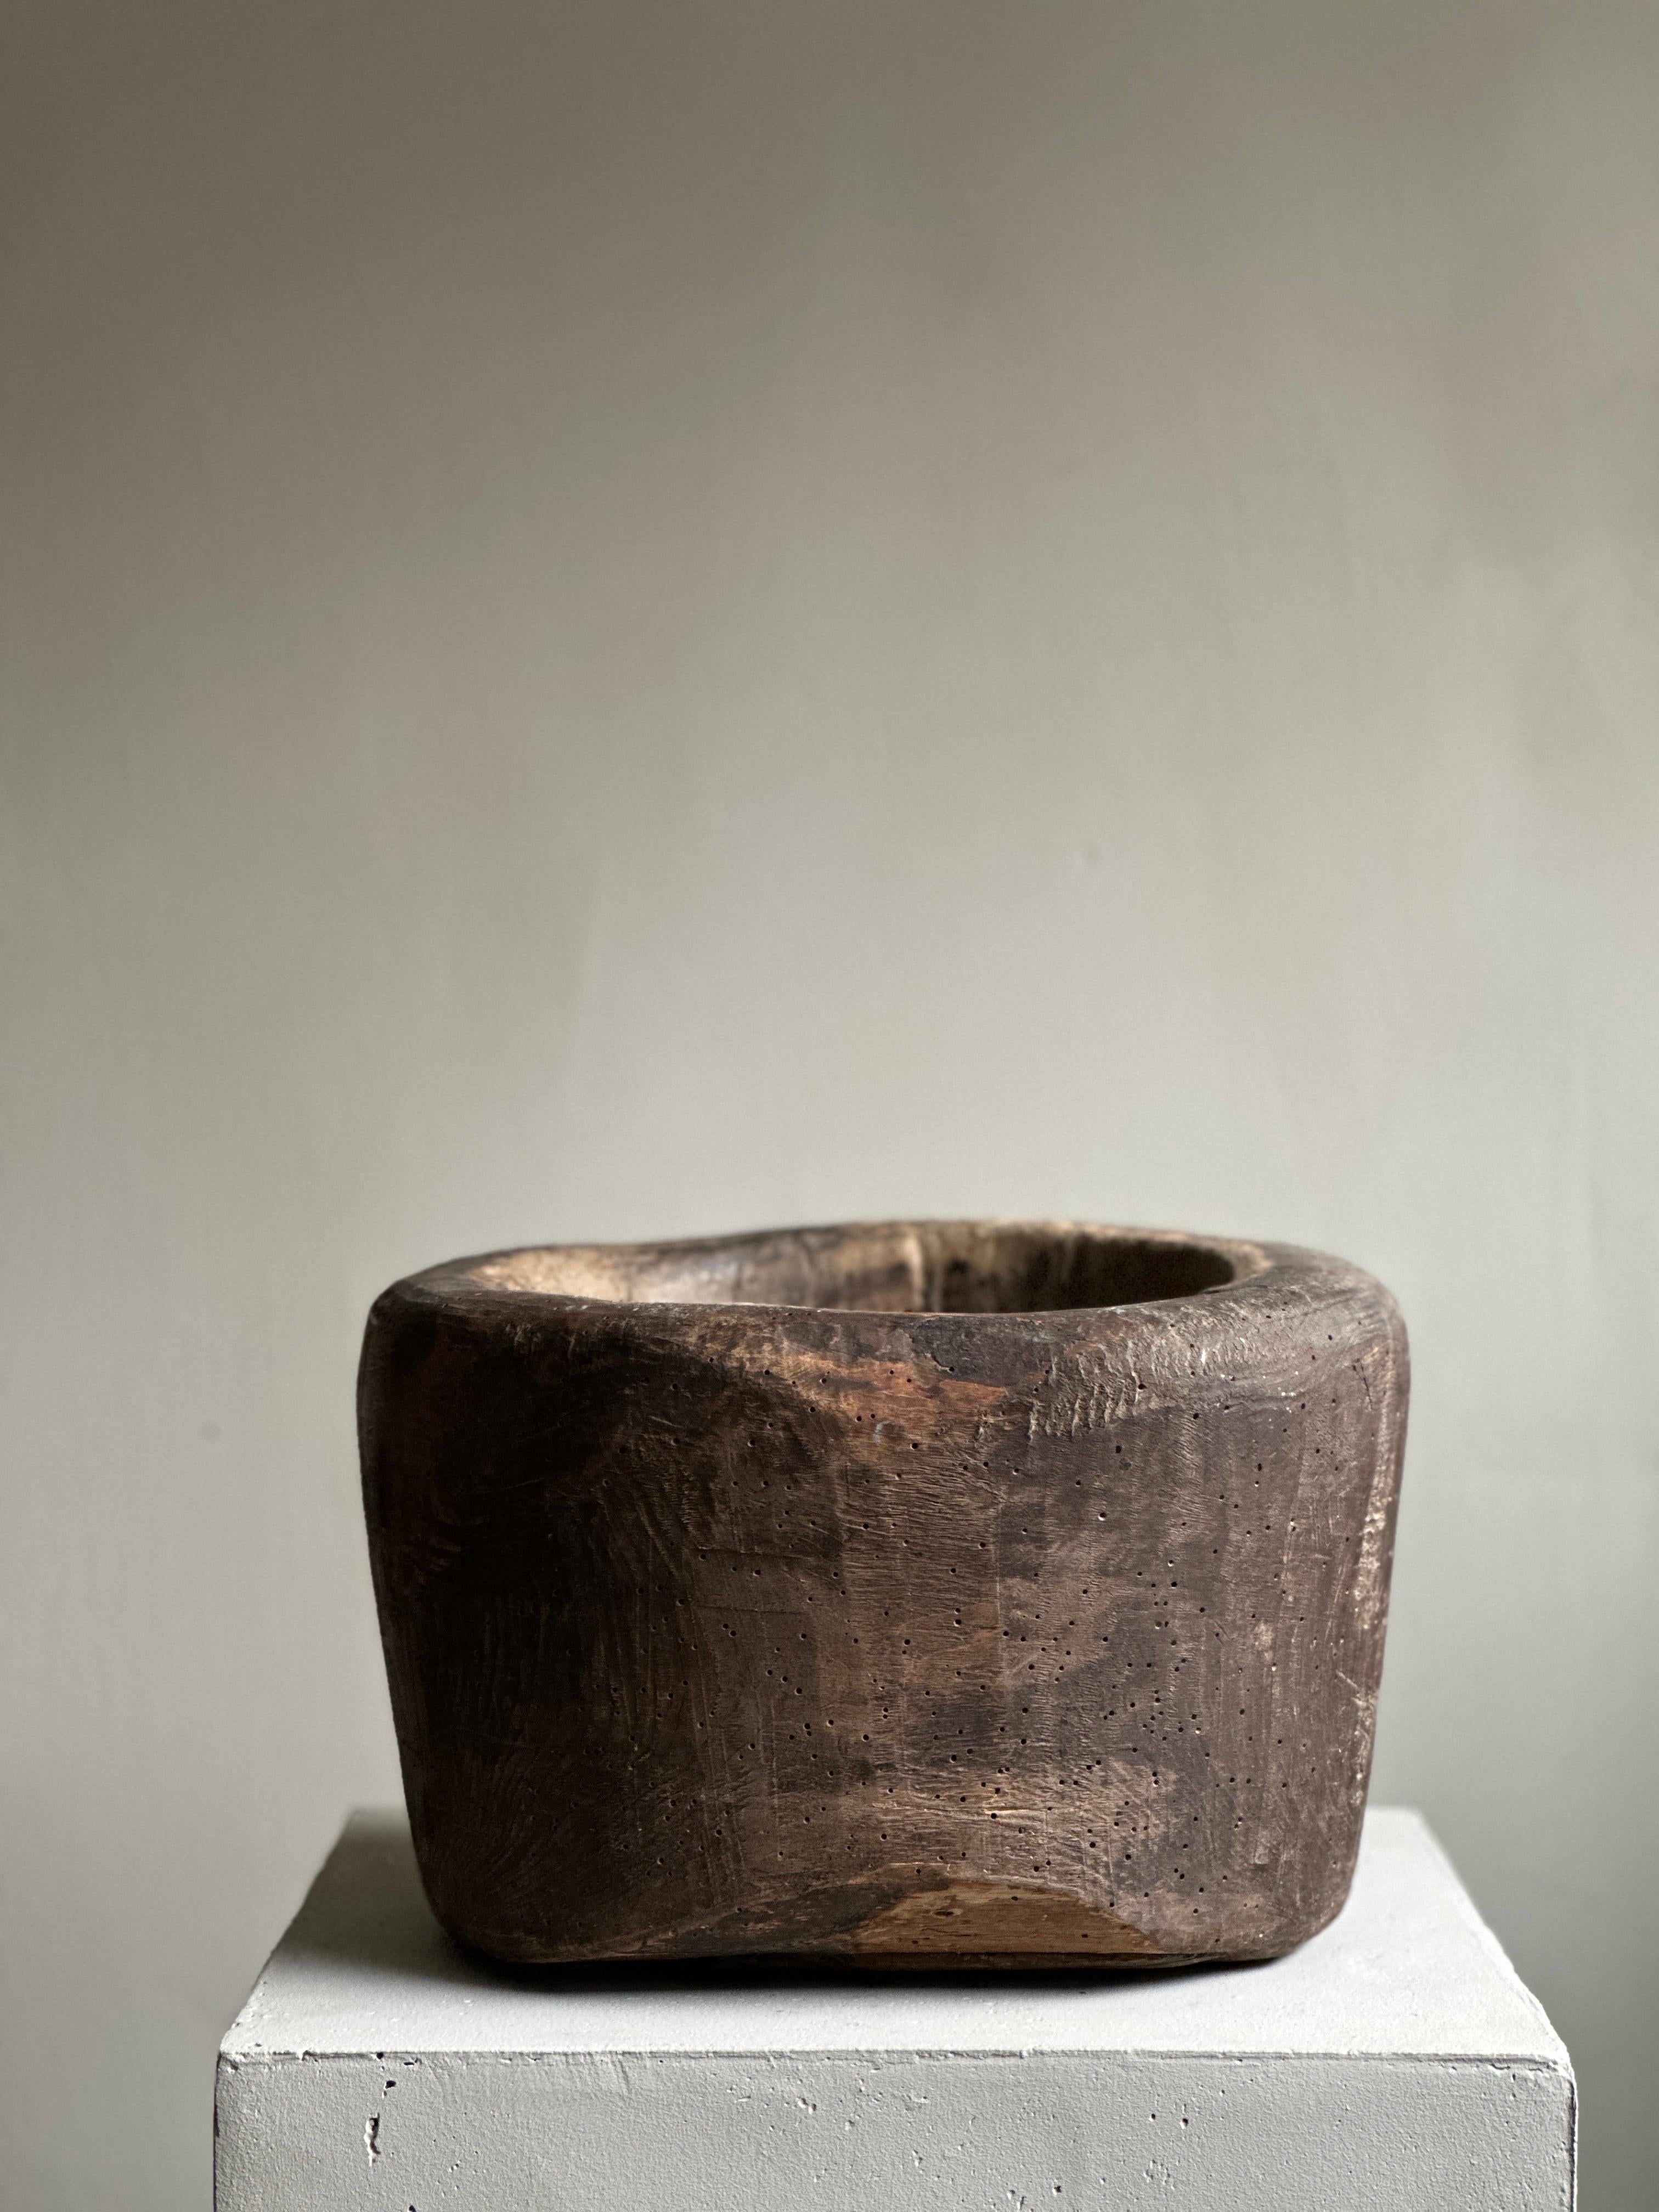 Wooden Wabi Sabi Mortar from Scandinavia, circa 1800s. In good vintage condition showing beautiful patina from age and use.